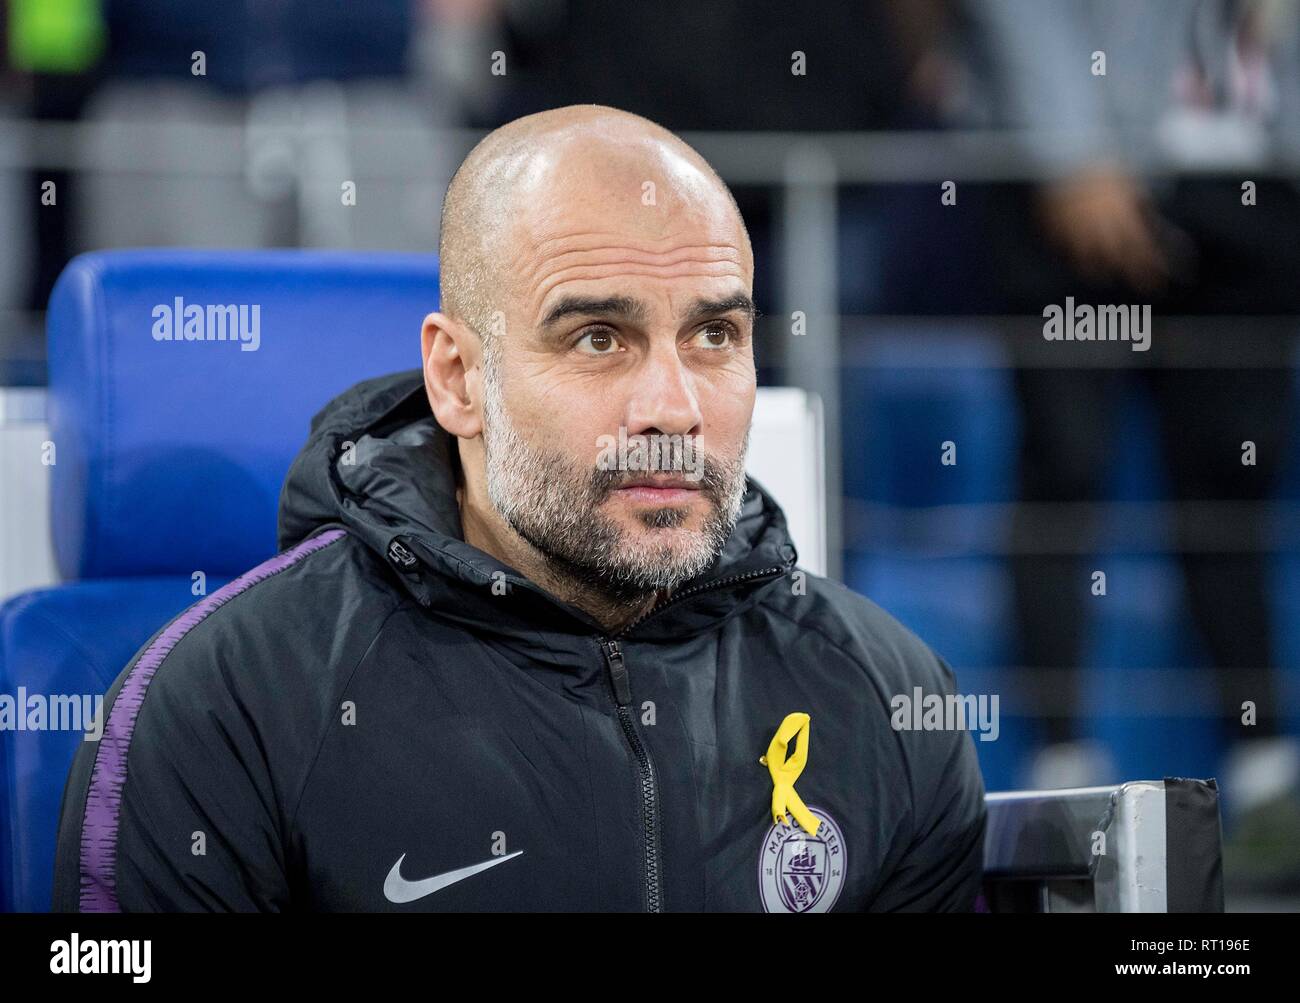 Manchester City Football Club Coach High Resolution Stock Photography and  Images - Alamy